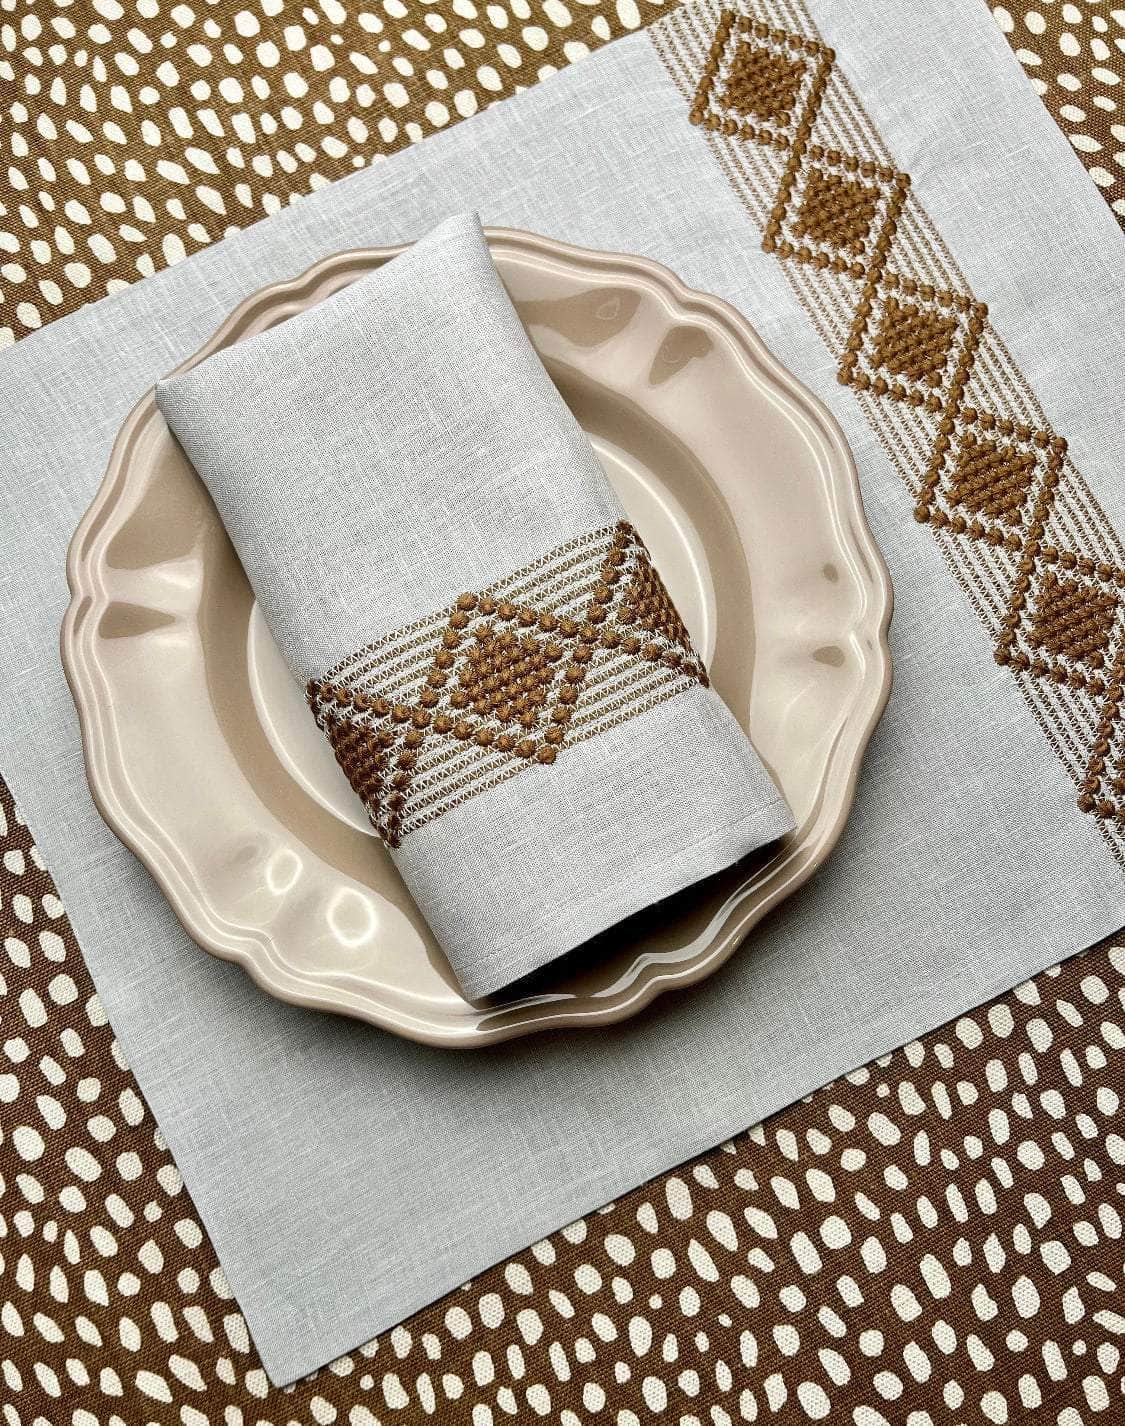 The Diamond Napkin & Placemat Set in Grey & Cocoa | One Napkin and One Placemat